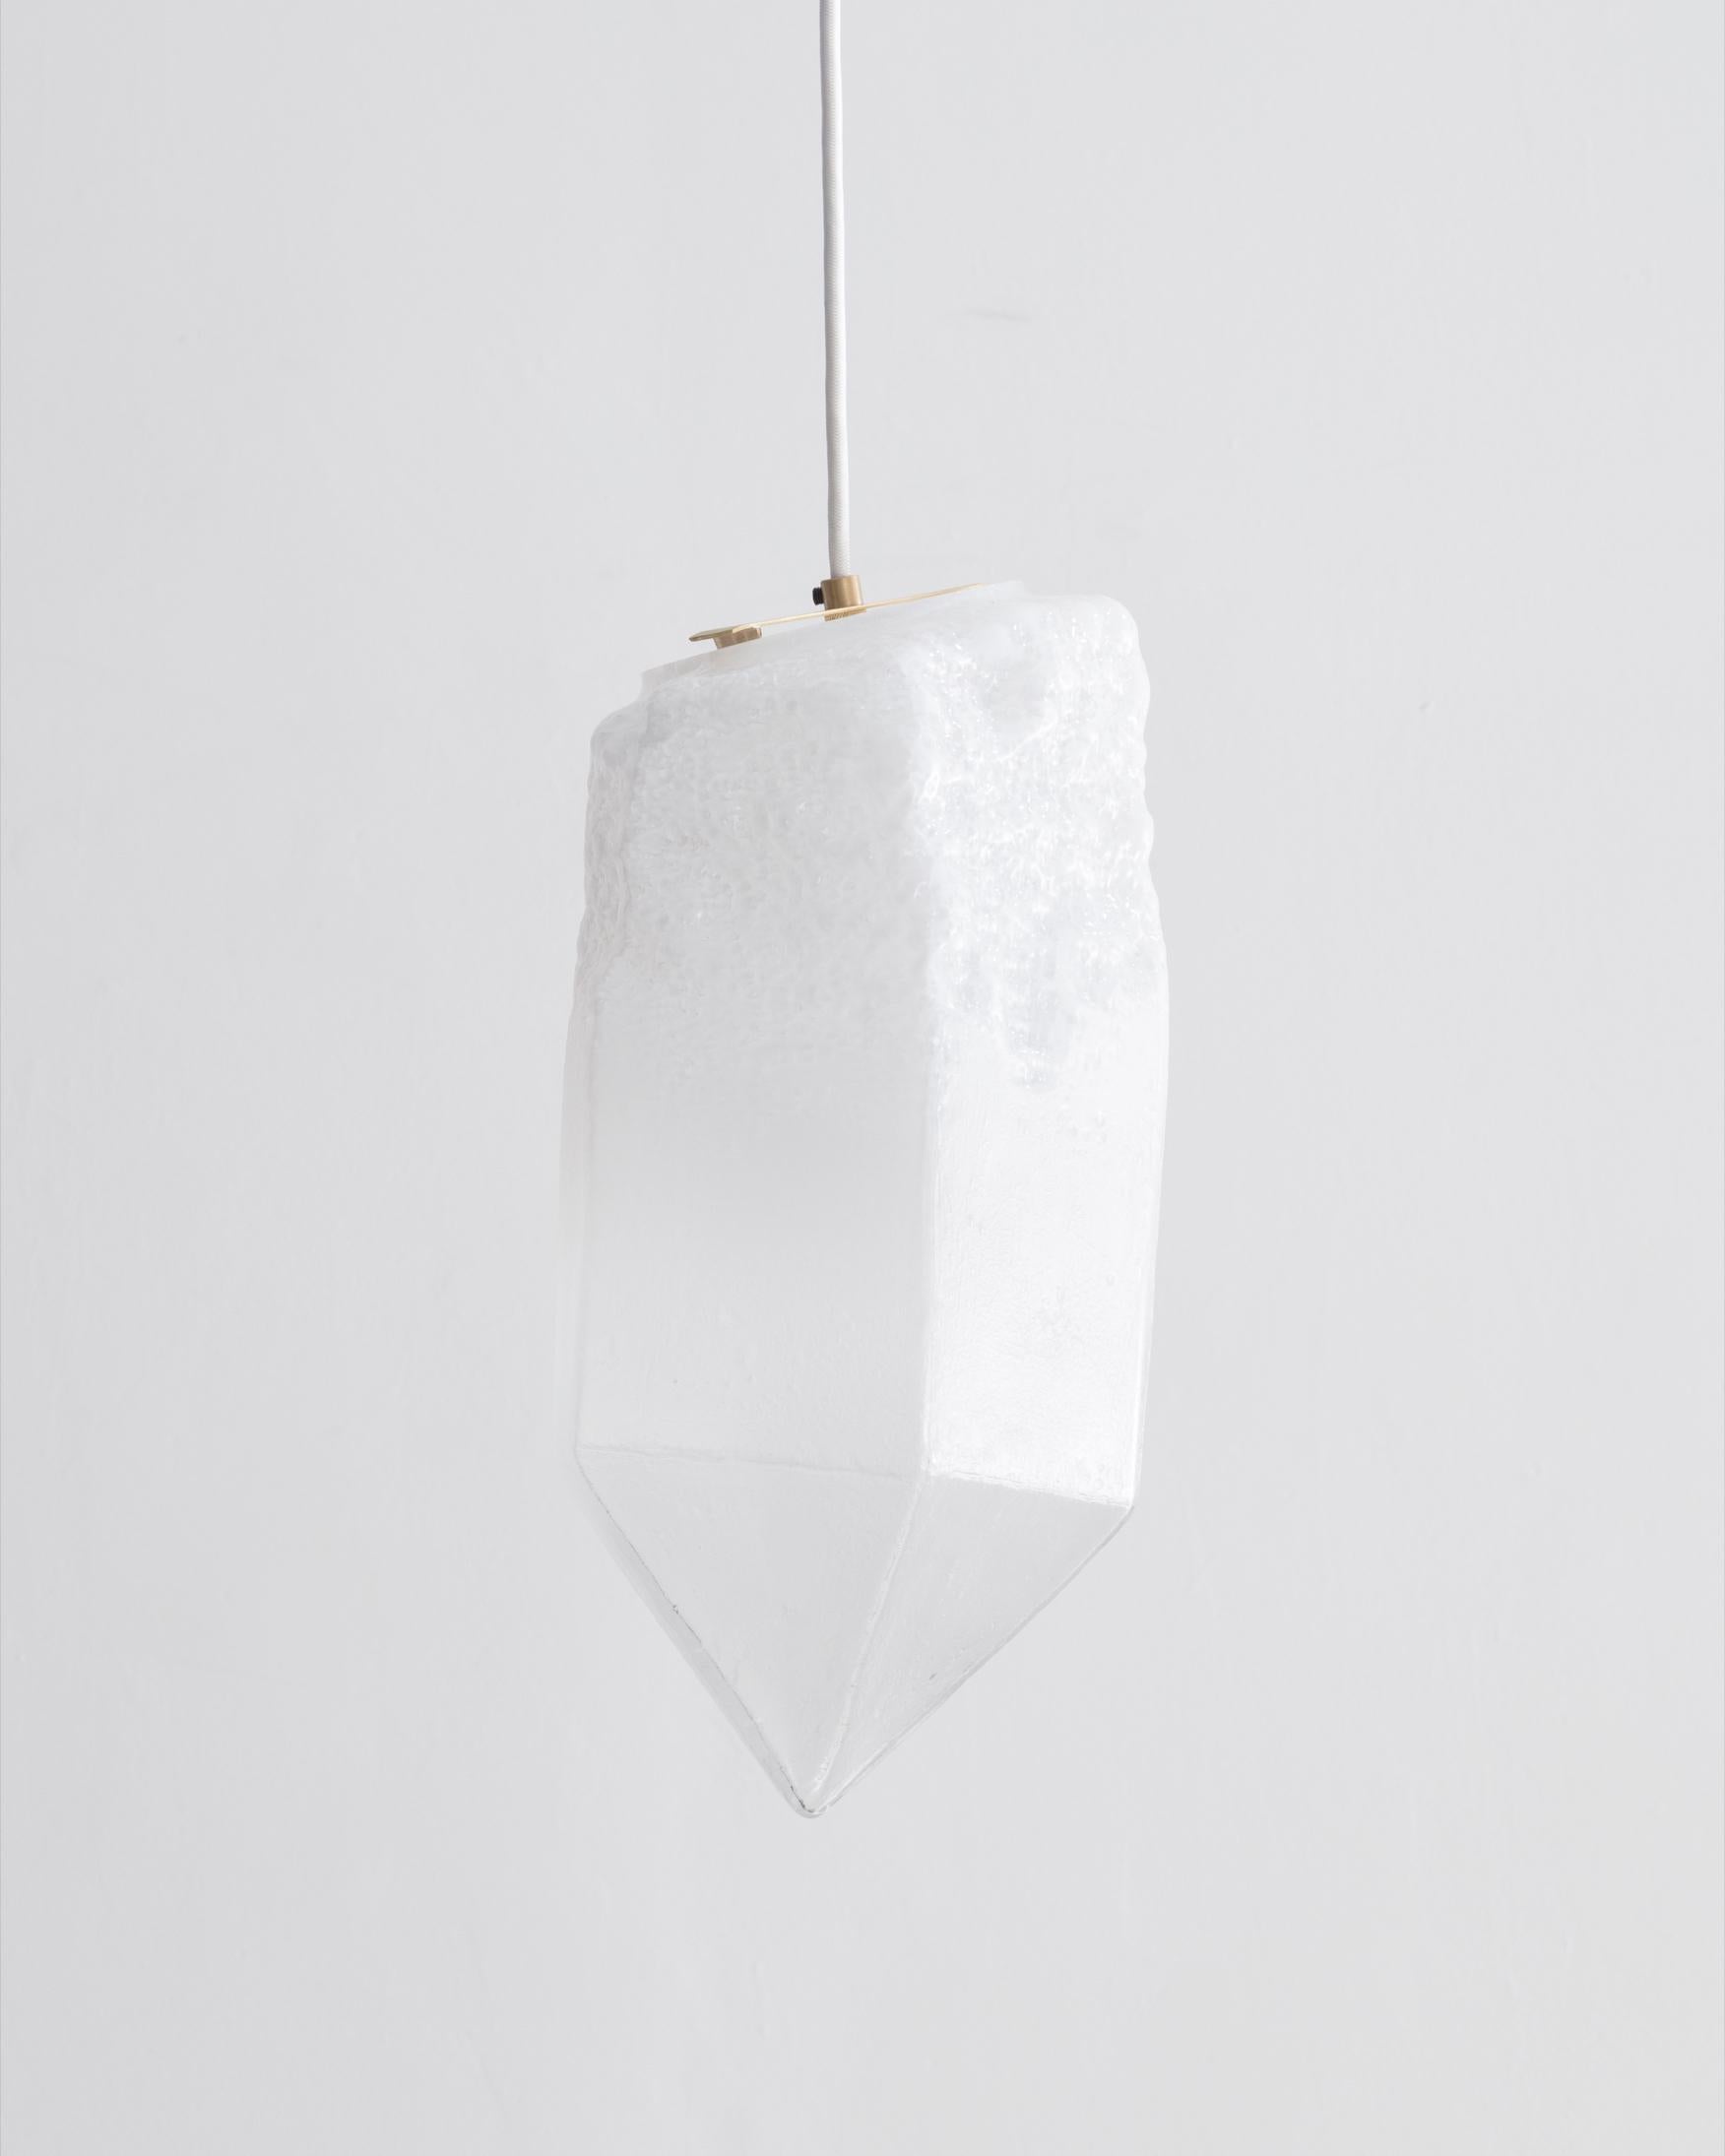 Illuminated hand blown white glass crystal pendant. Designed and made by Jeff Zimmerman, USA, 2017.

Limited number available. Please note that each item may differ slightly in color and shape.